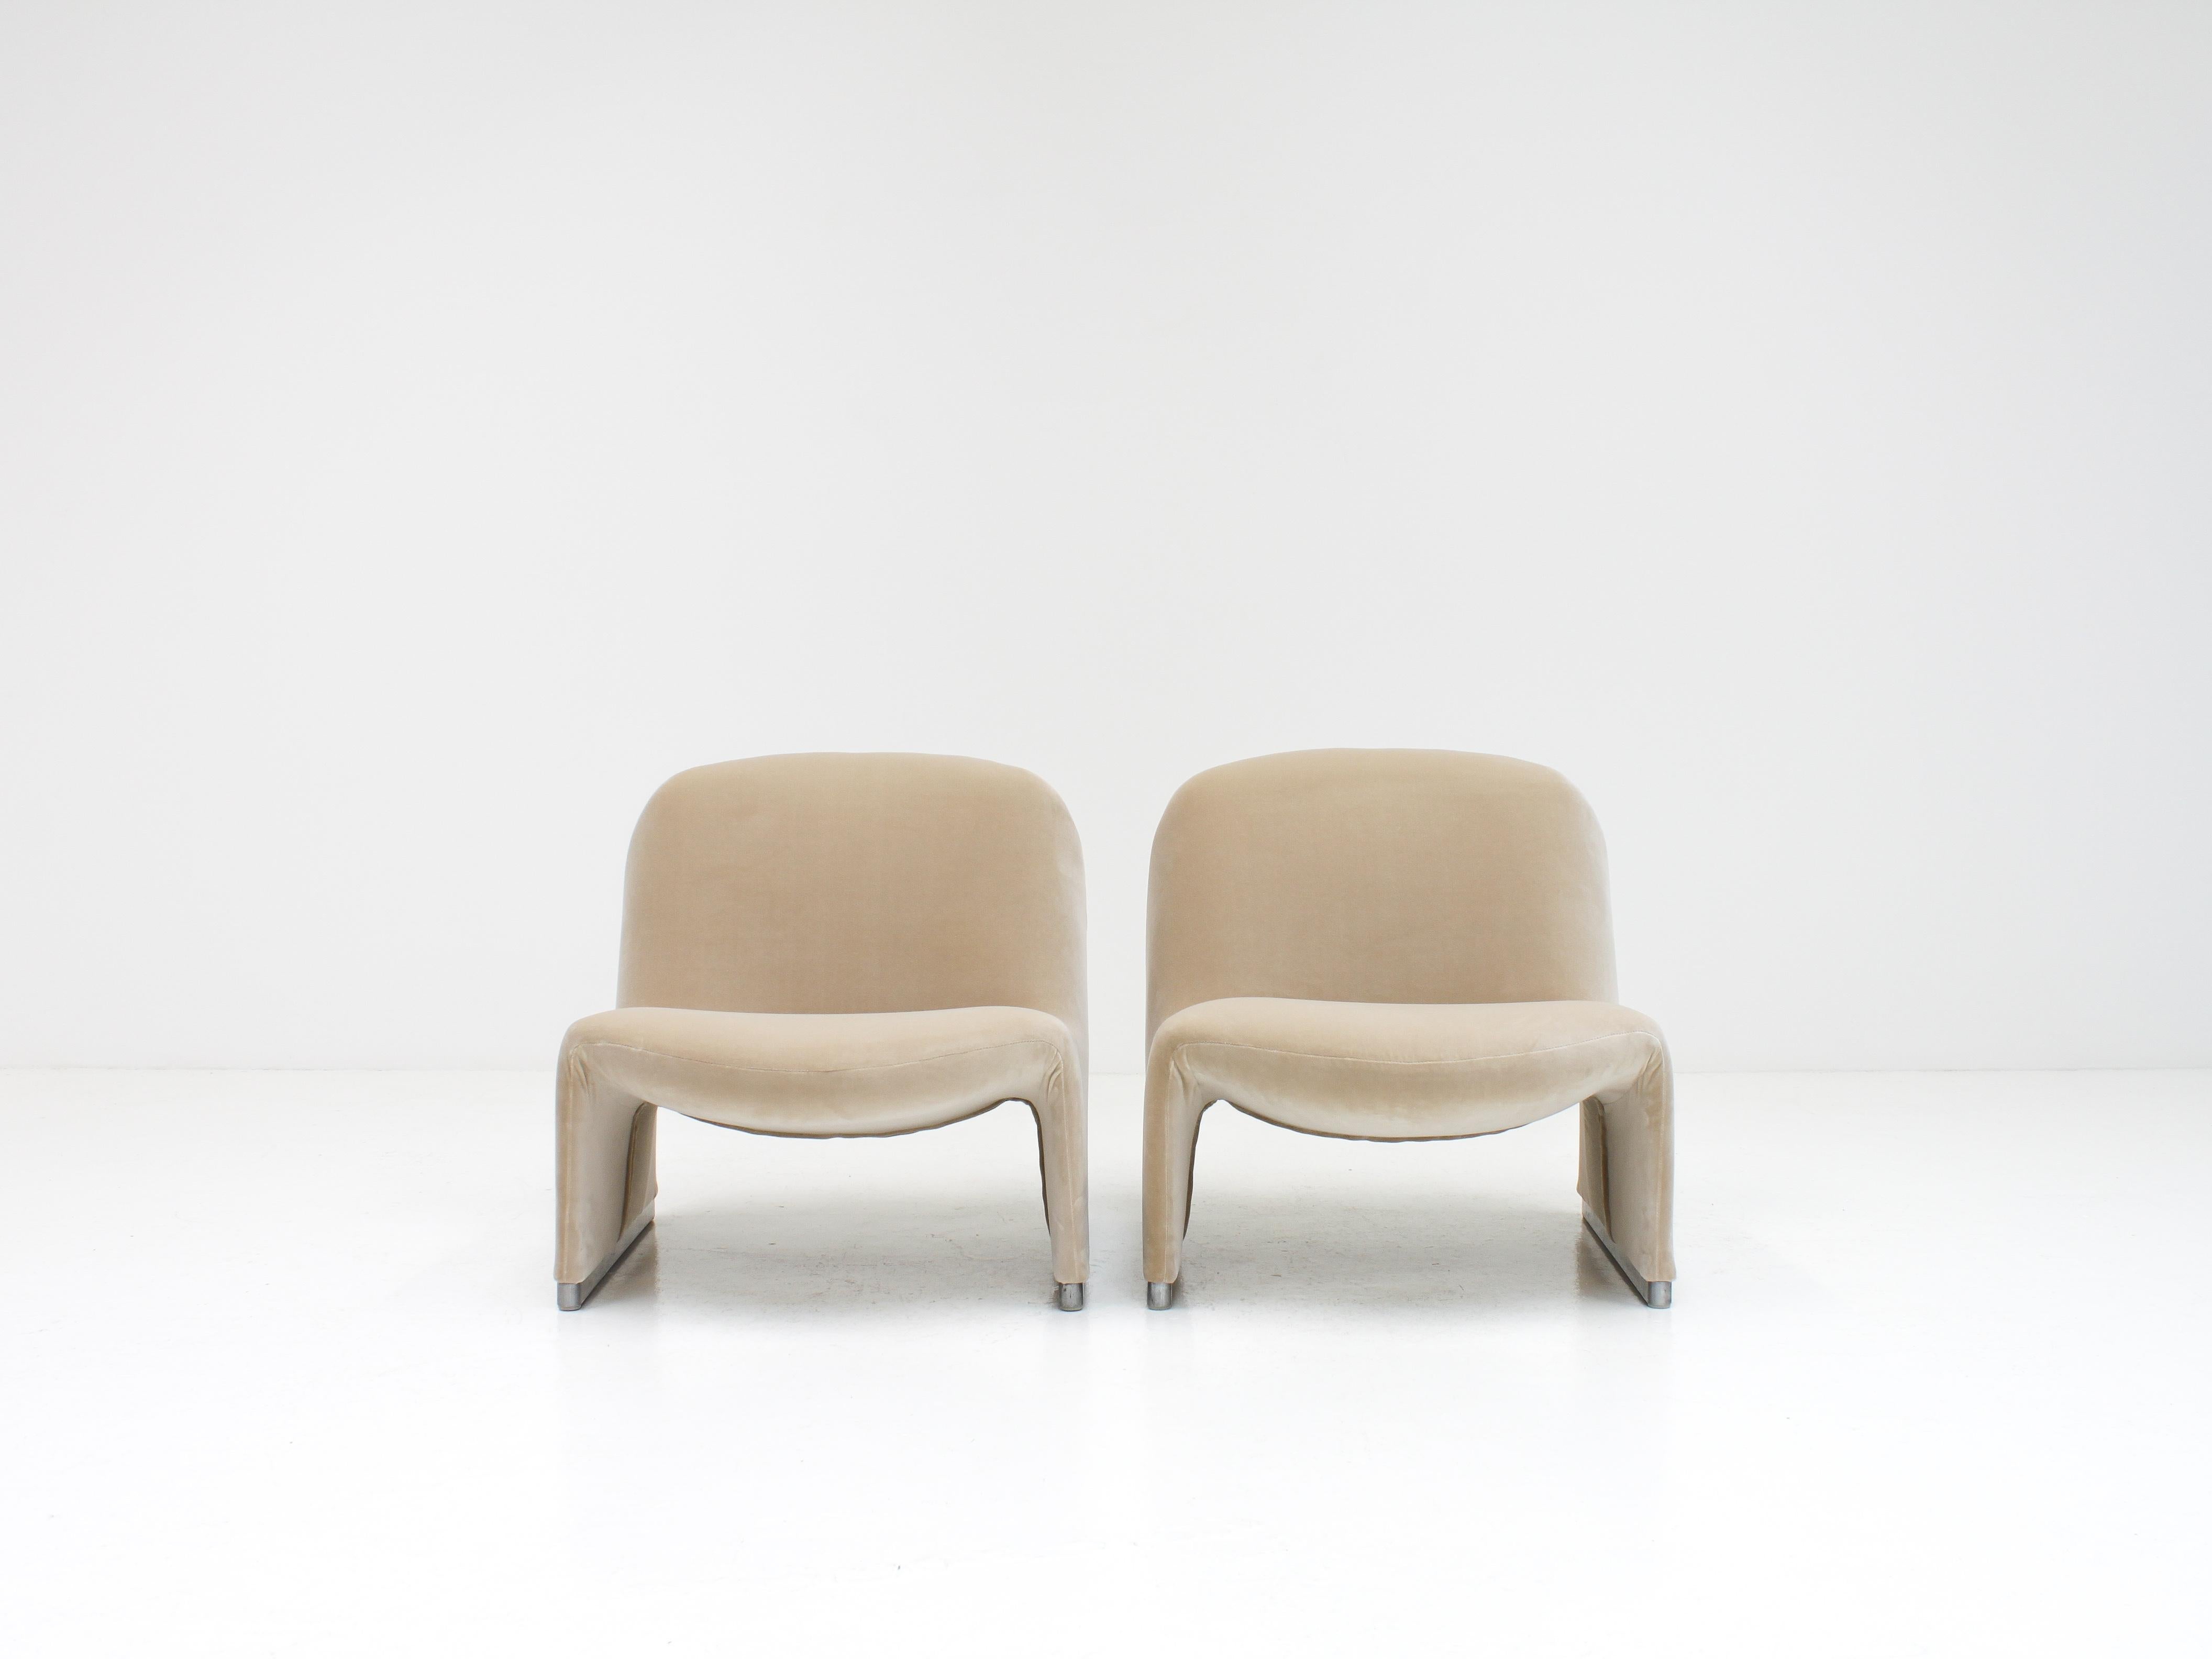 Dutch Giancarlo Piretti “Alky” Chairs in New Velvet, Artifort, 1970s - *Customizable* For Sale